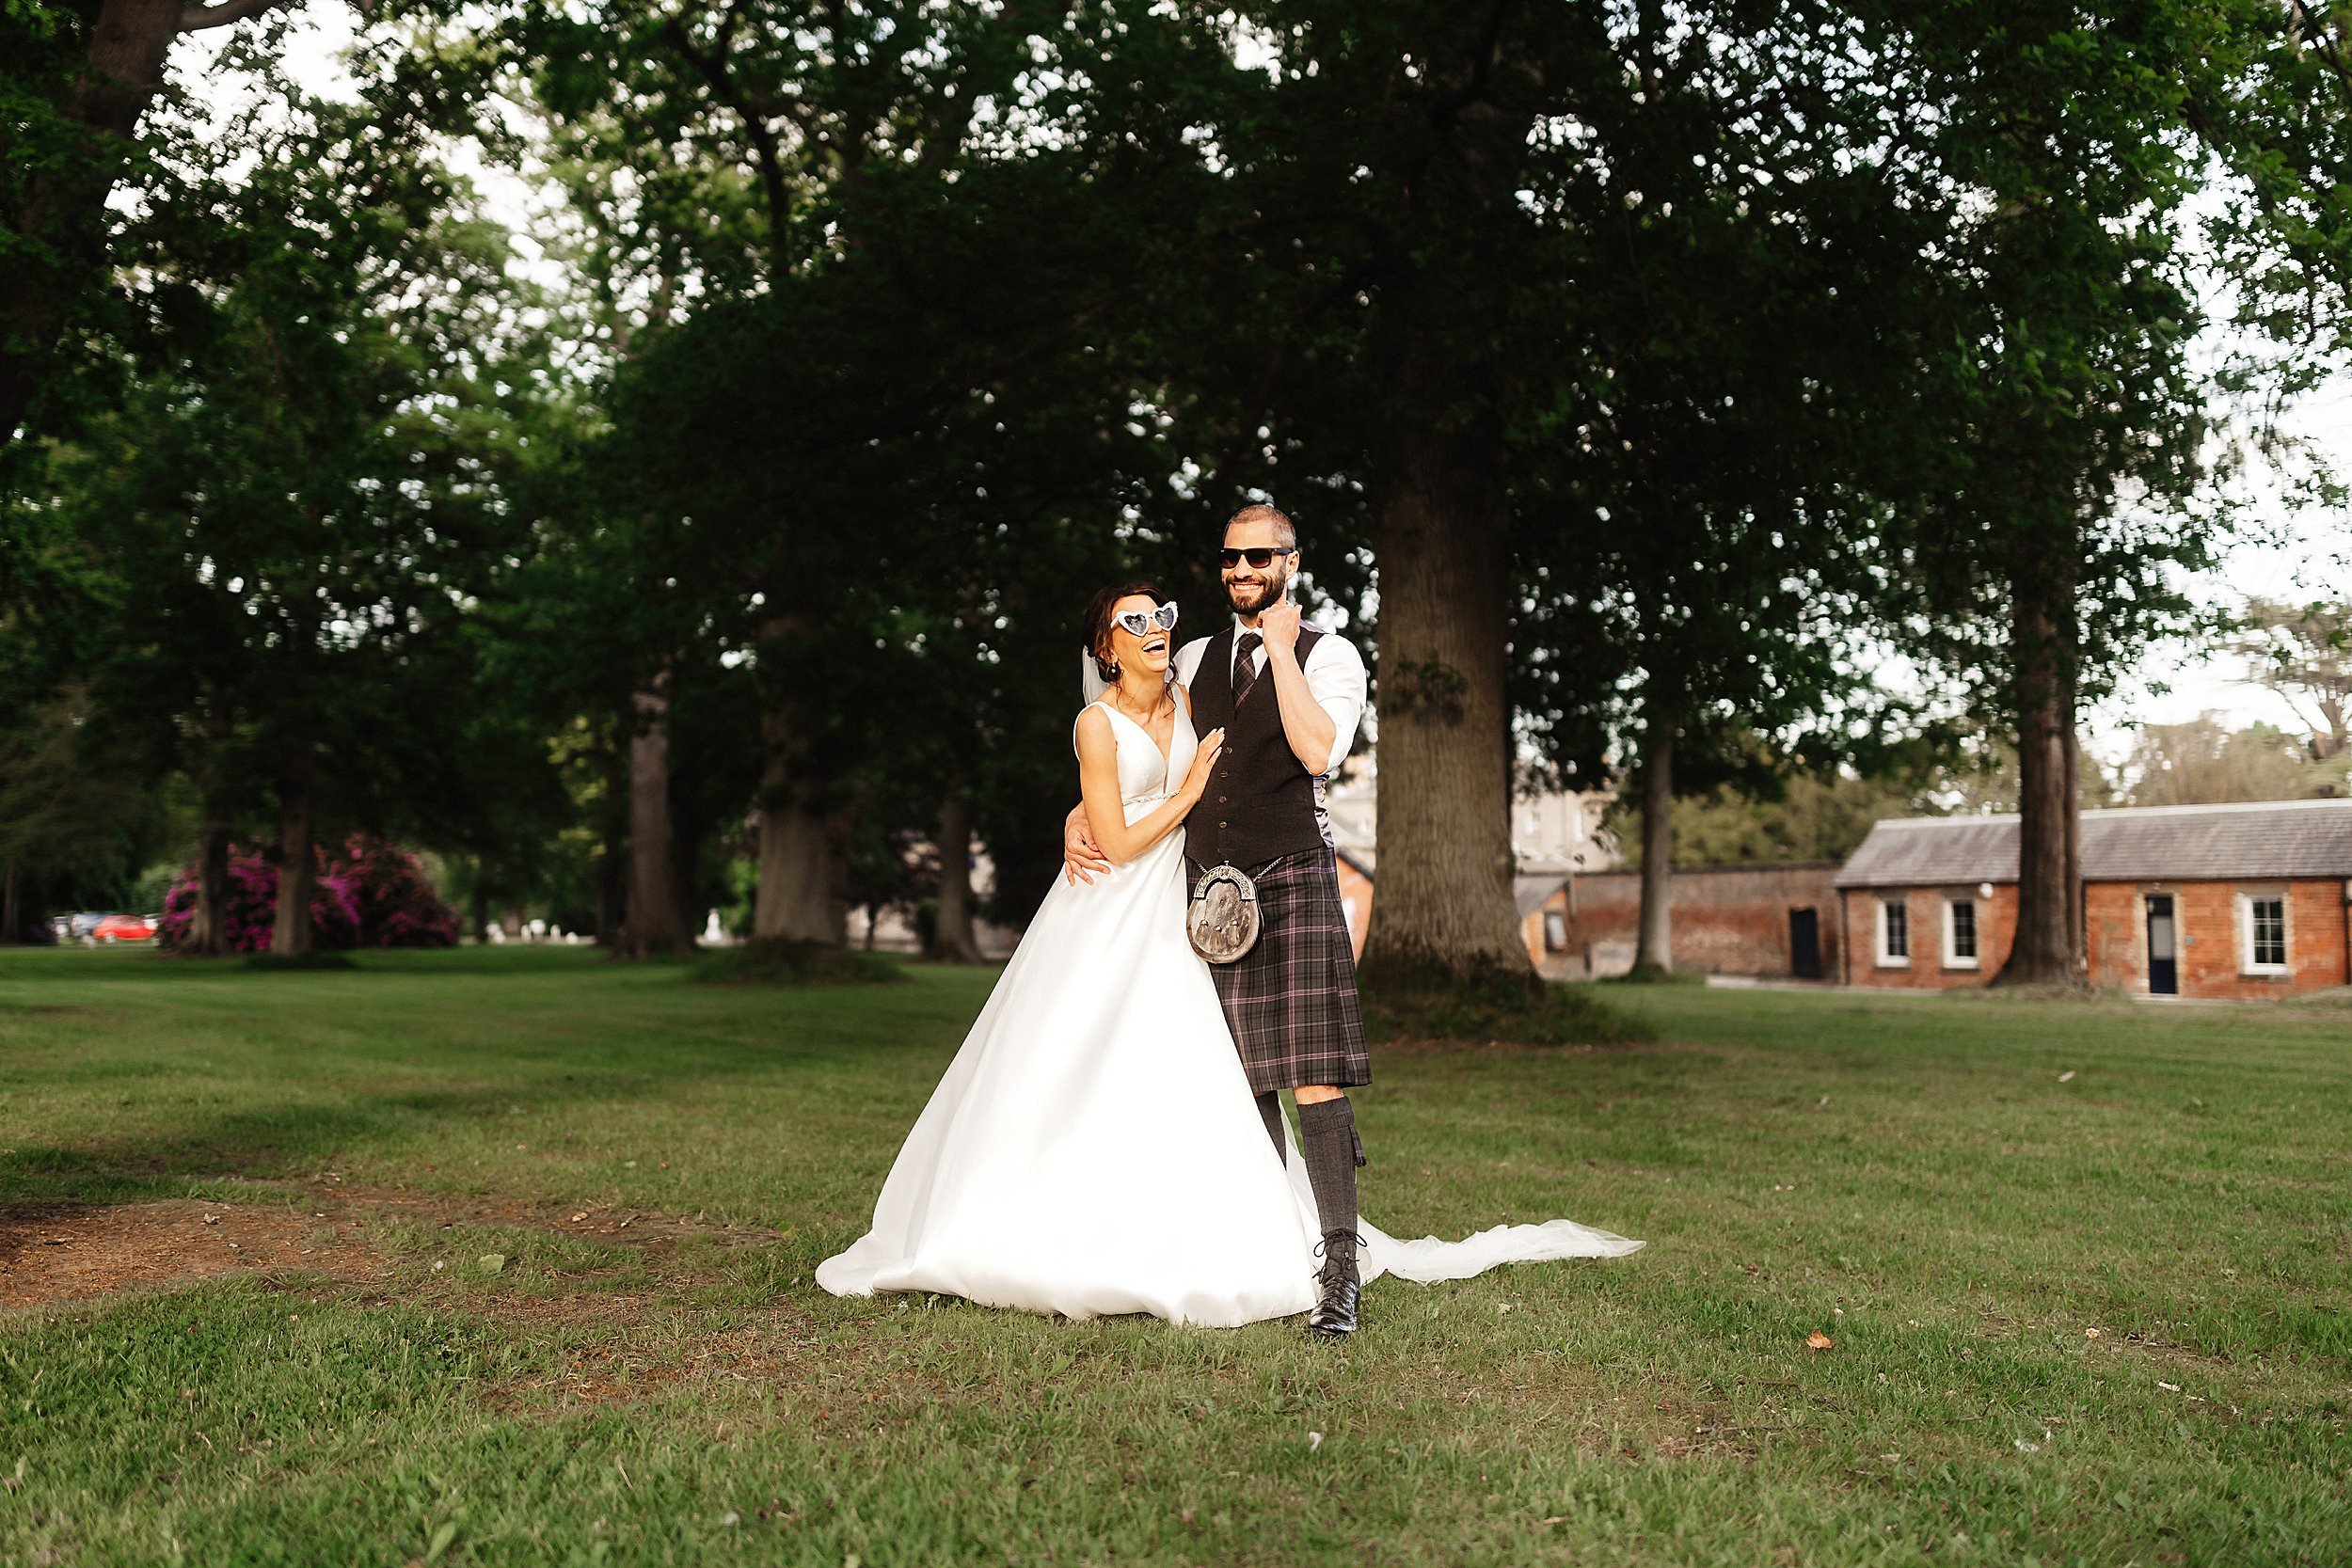 the bride and groom pose wearing sunglasses in the gardens of errol park wedding venue in perthsire in scotland